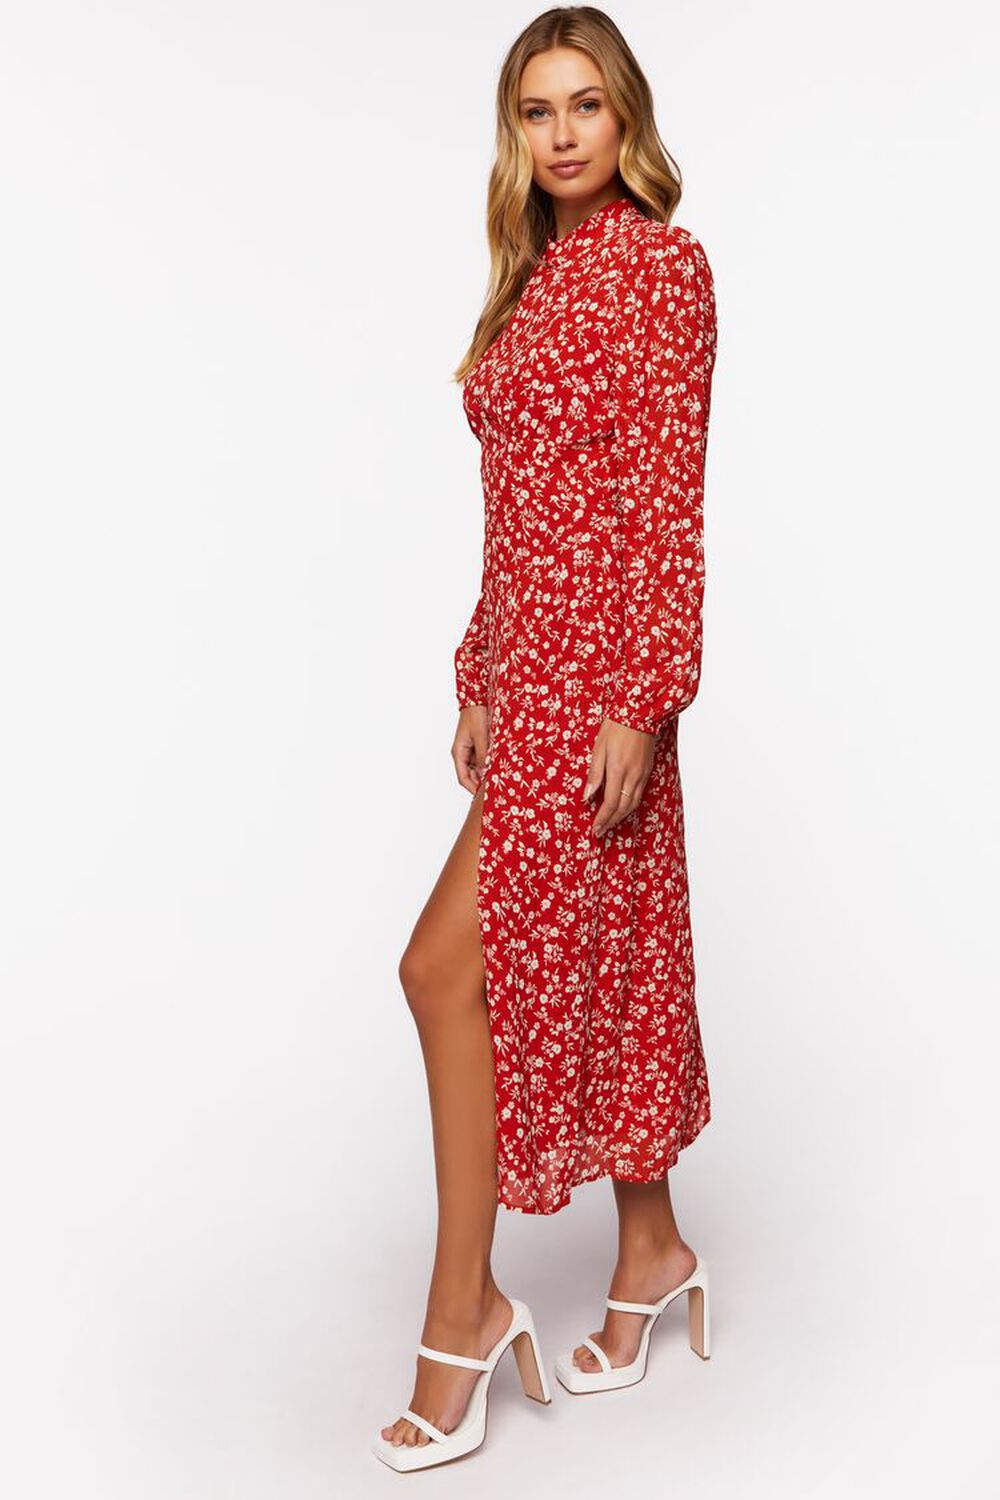 RED/MULTI Ditsy Floral Print Open-Back Midi Dress, image 2